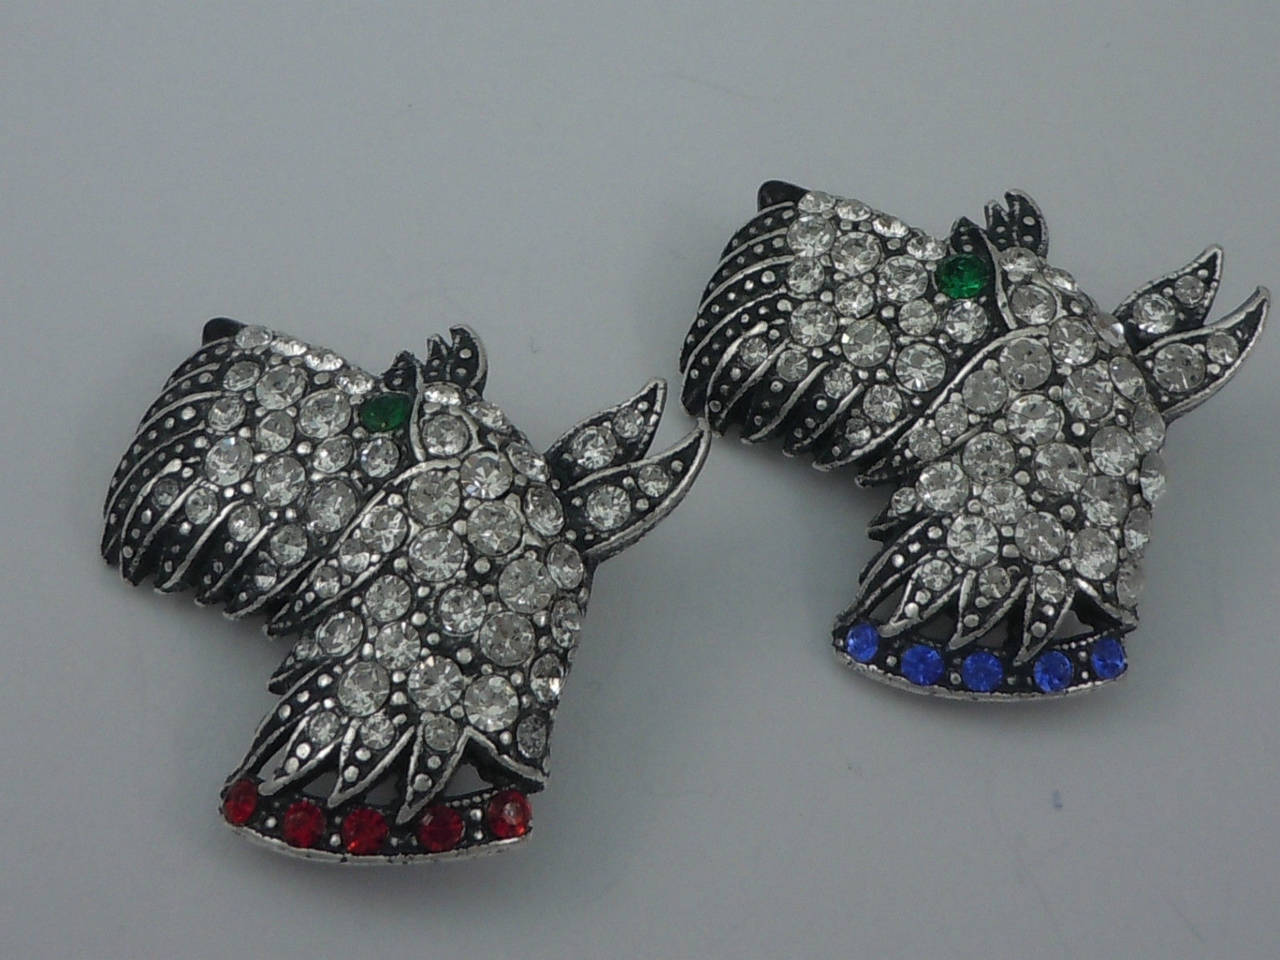 Featuring a pair of Adorable Terrier Head Brooches; Askew London Antiqued and set with Crystal Chatons and green eyes; red & blue Chatons set Collars; each brooch measures approx. 1.25'' across. Add your own Style, Fun and Pizzazz to any outfit!